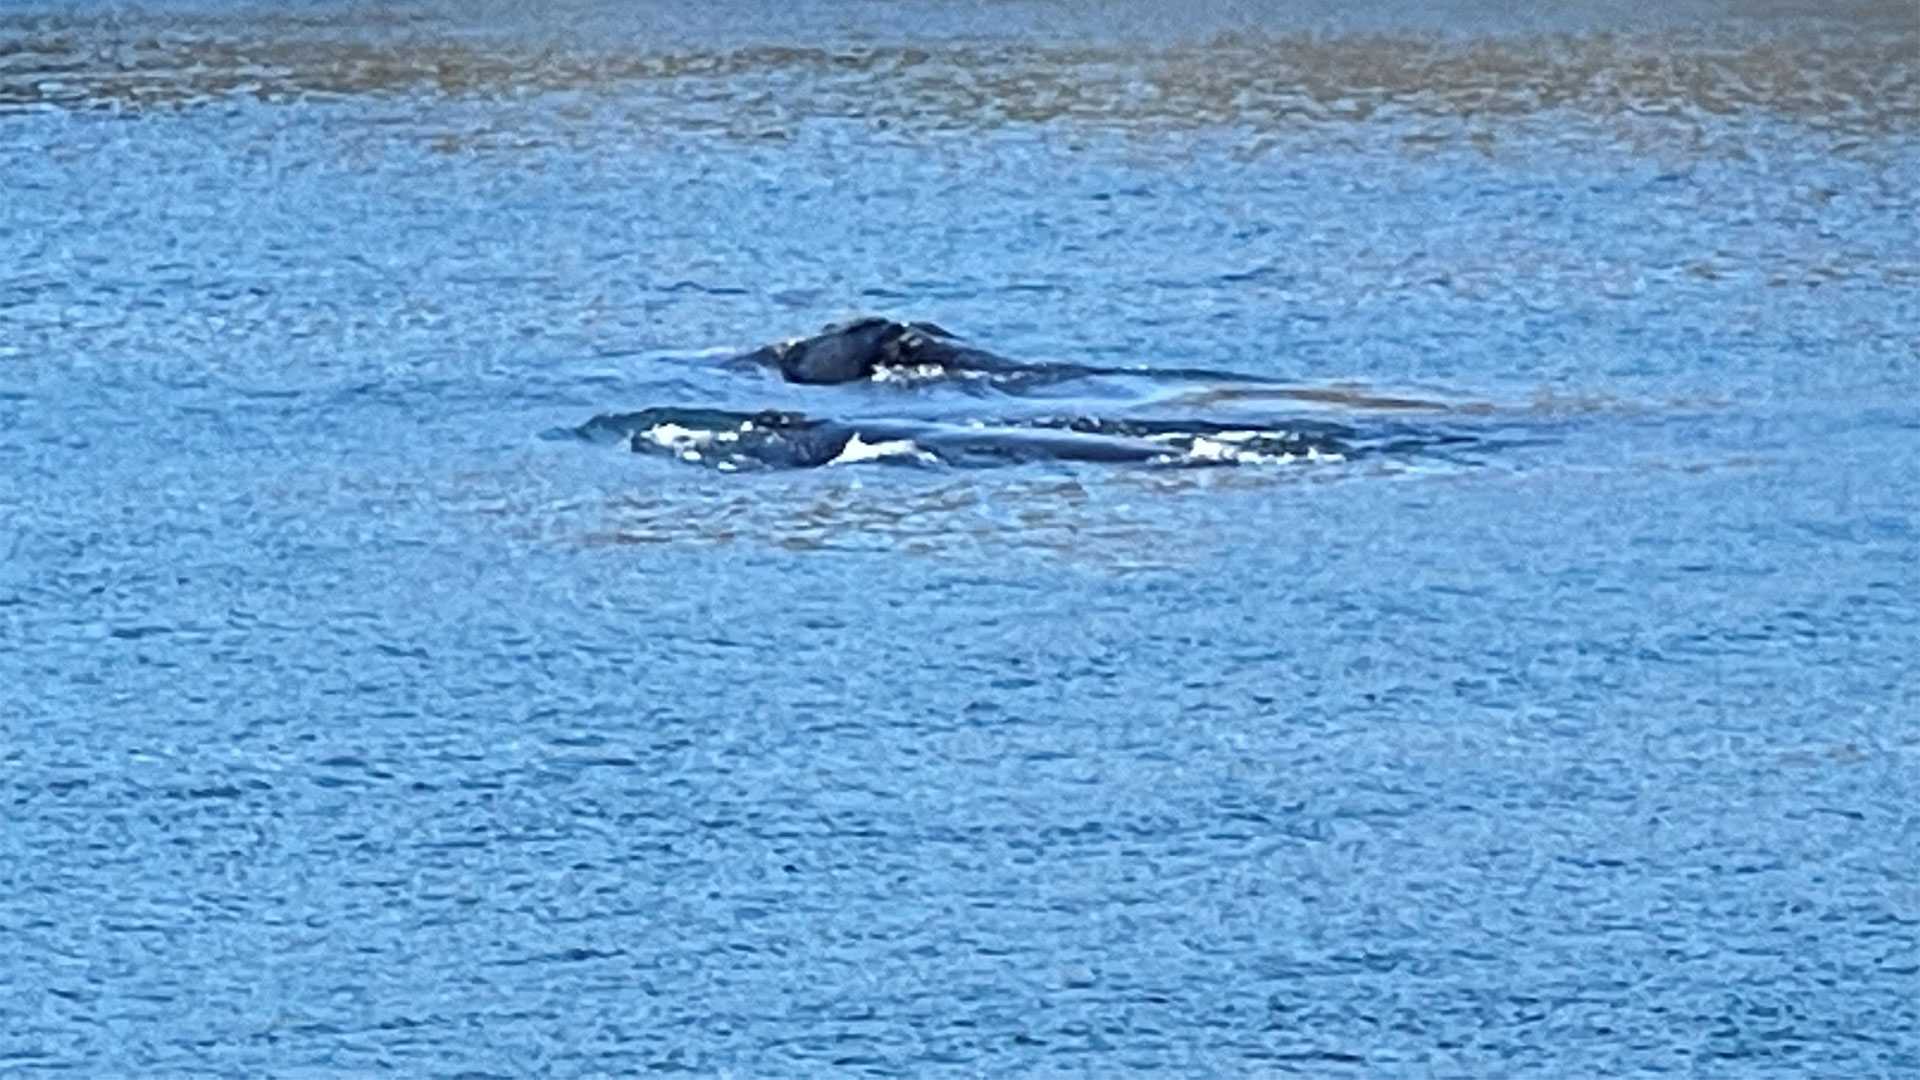 Canal closes while right whale mother, calf swim | 98 Rock Online